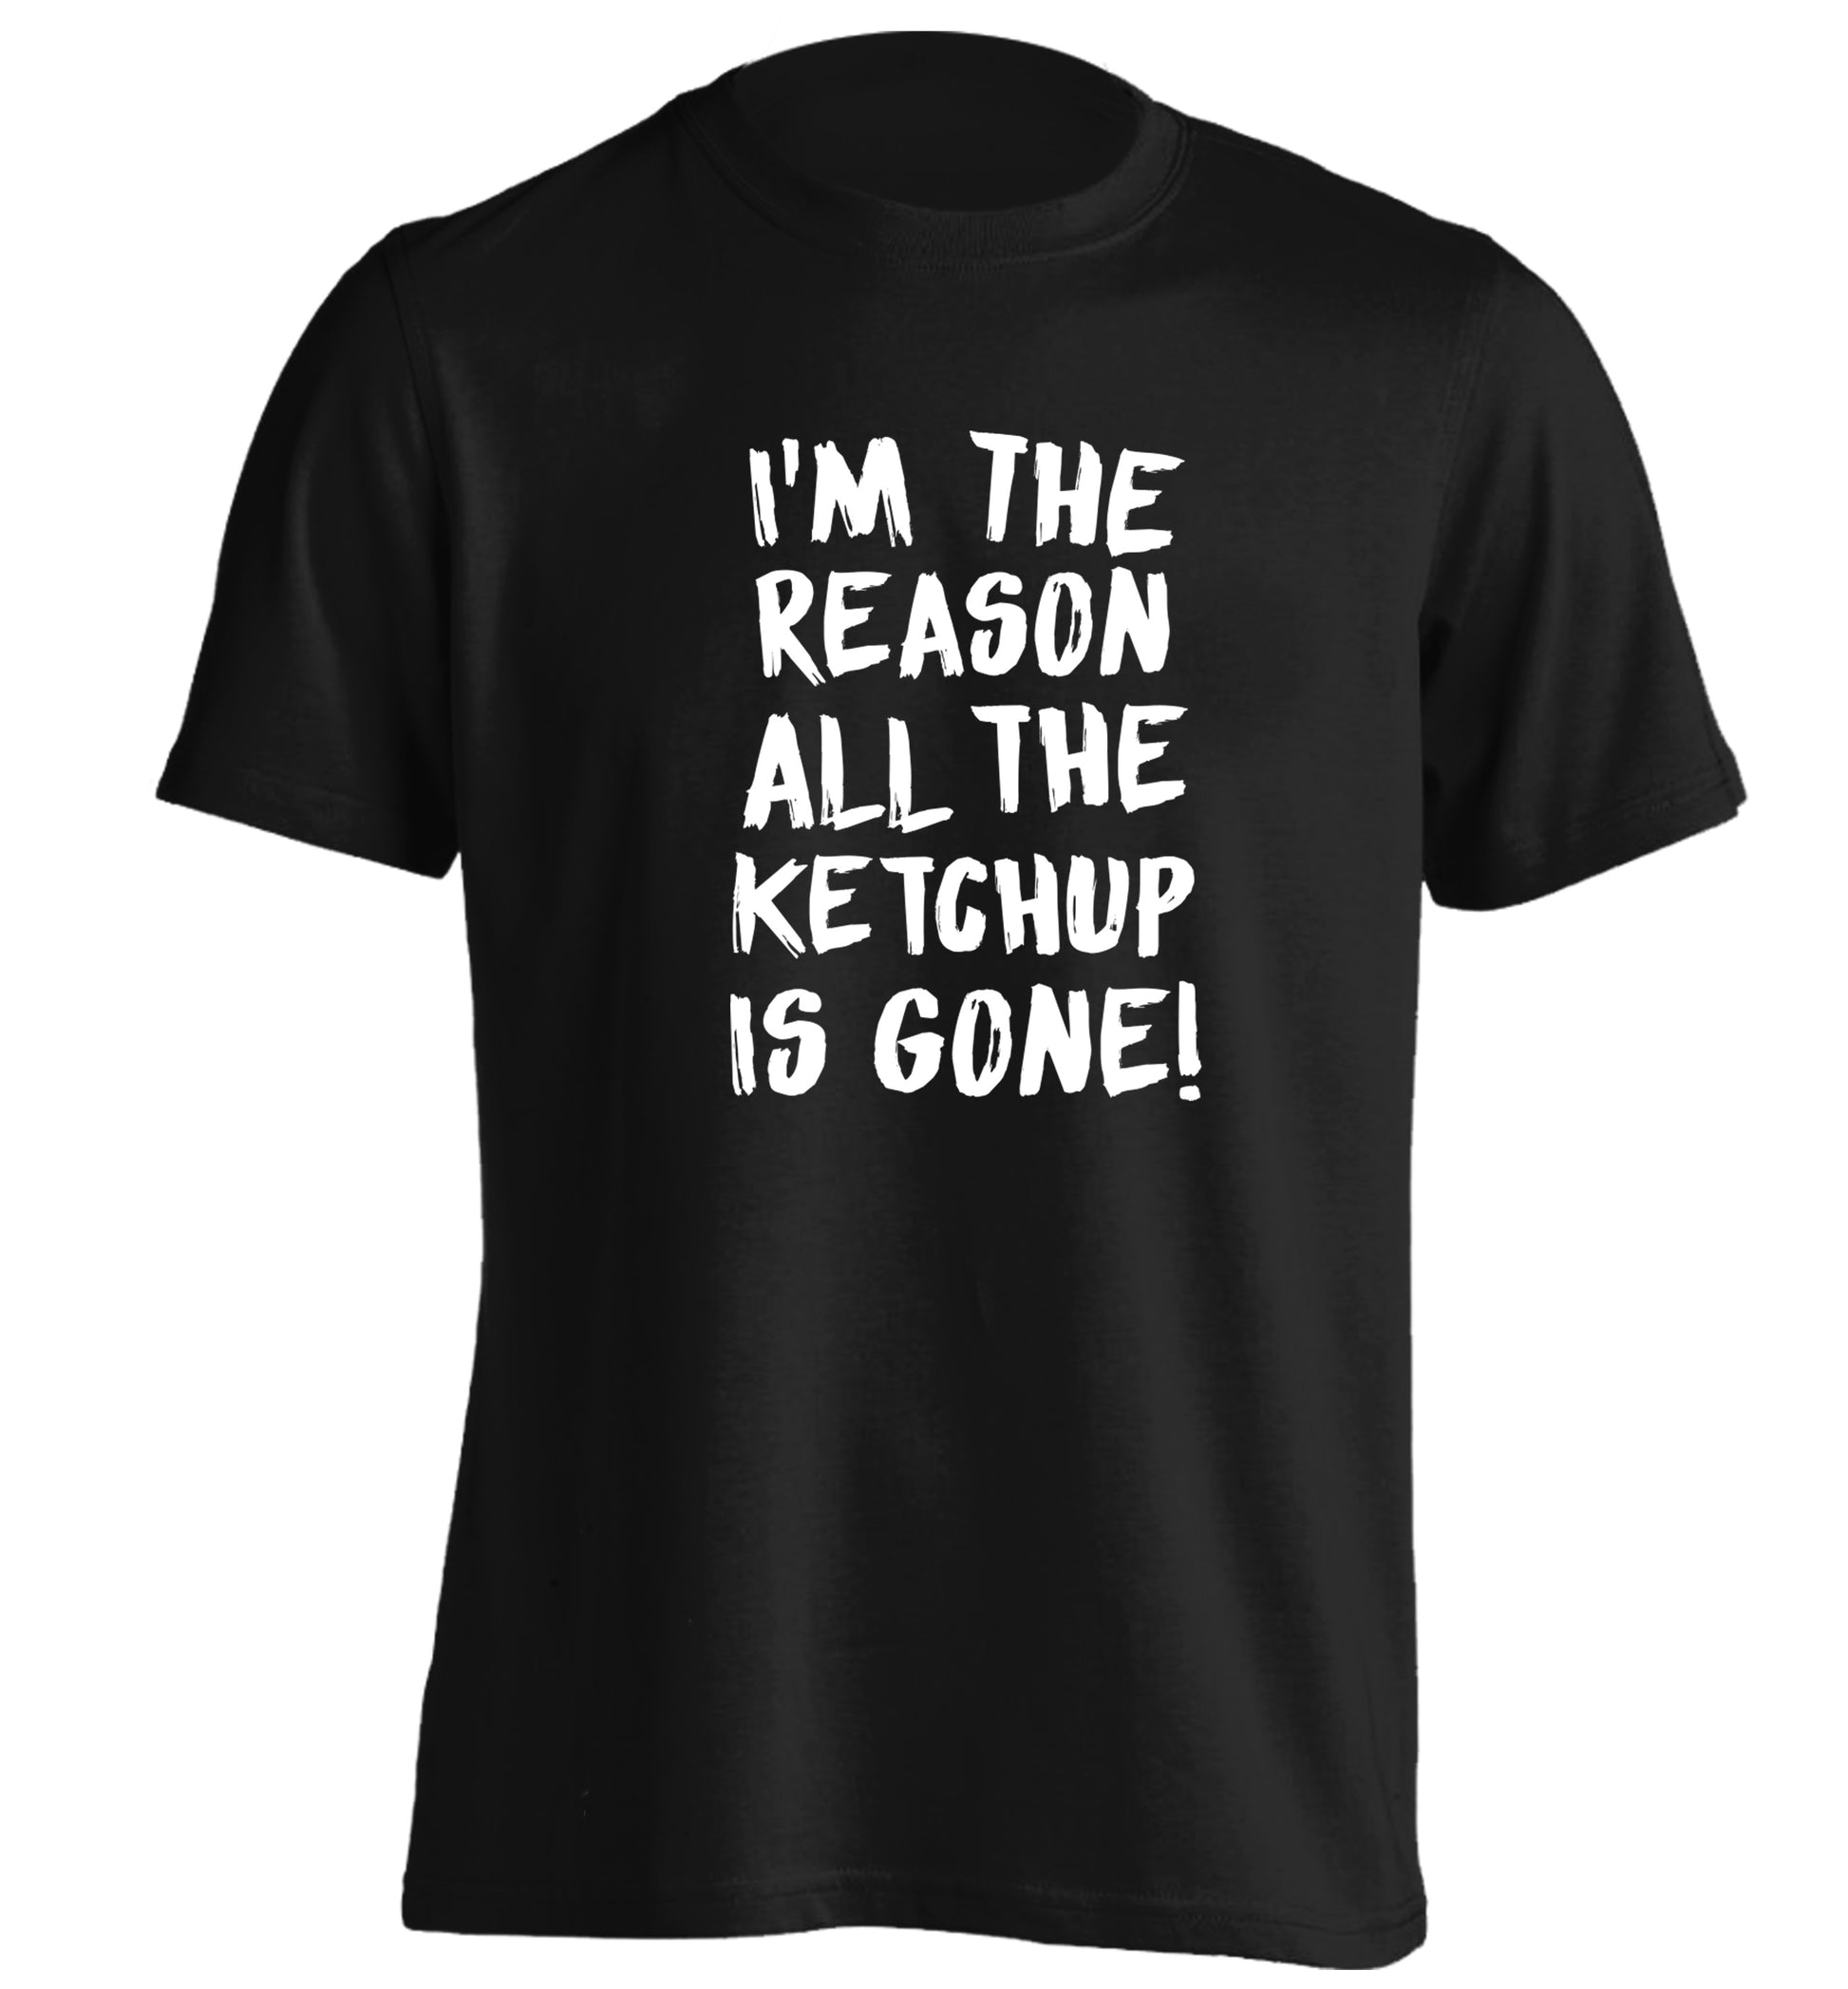 I'm the reason why all the ketchup is gone adults unisex black Tshirt 2XL